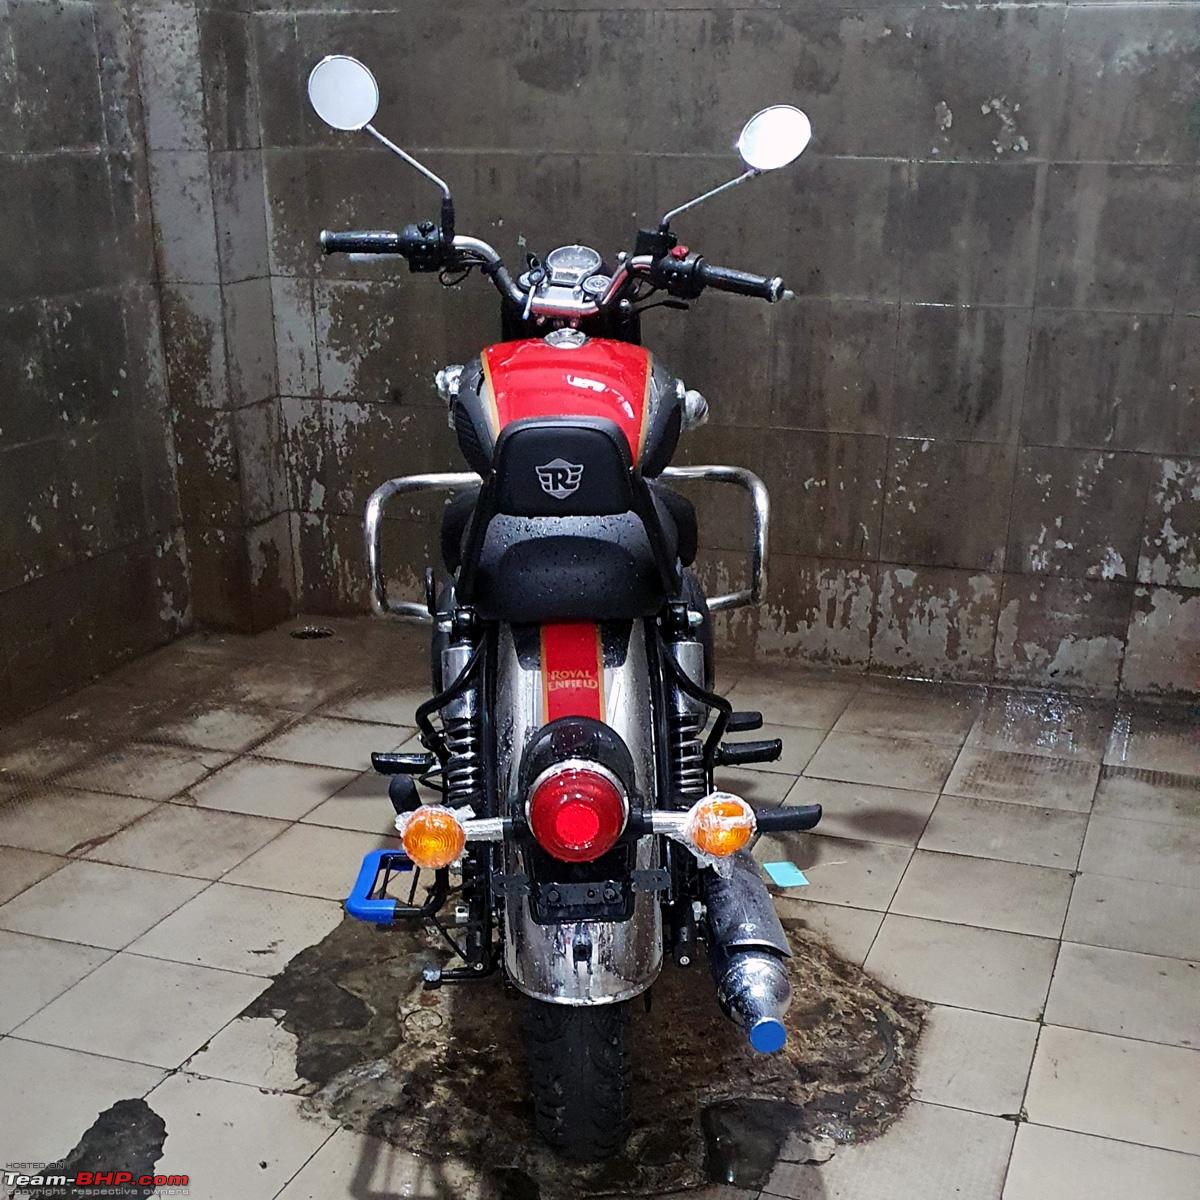 My 2023 Royal Enfield Classic 350 in Chrome Red: Ownership Review, Indian, Member Content, Royal Enfield Classic 350, Bike ownership